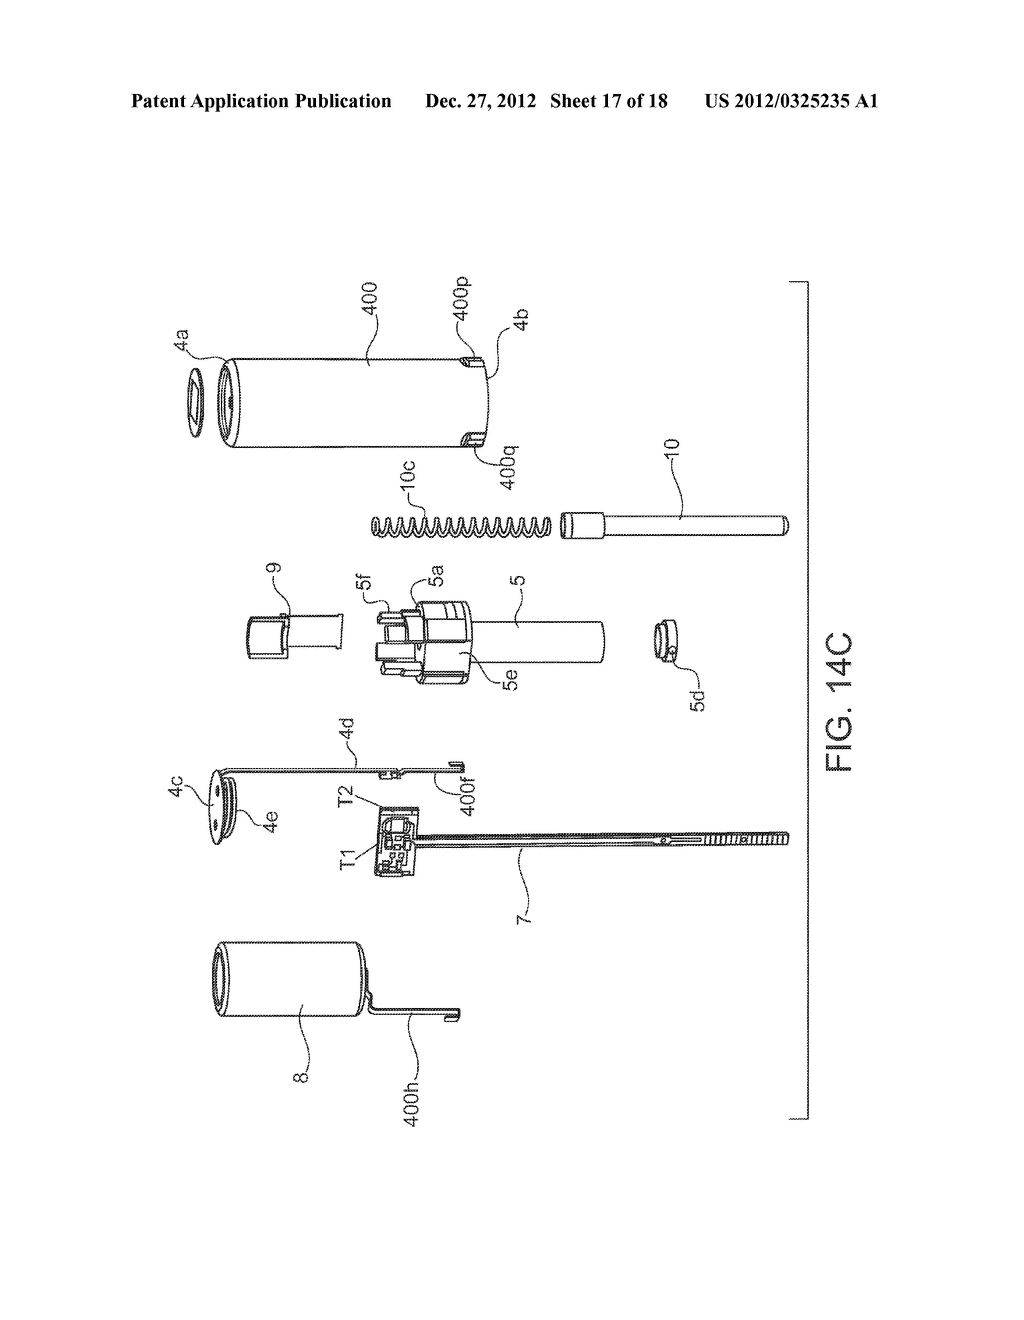 Heating Applicator System For Products That May Be Degraded By Heat - diagram, schematic, and image 18